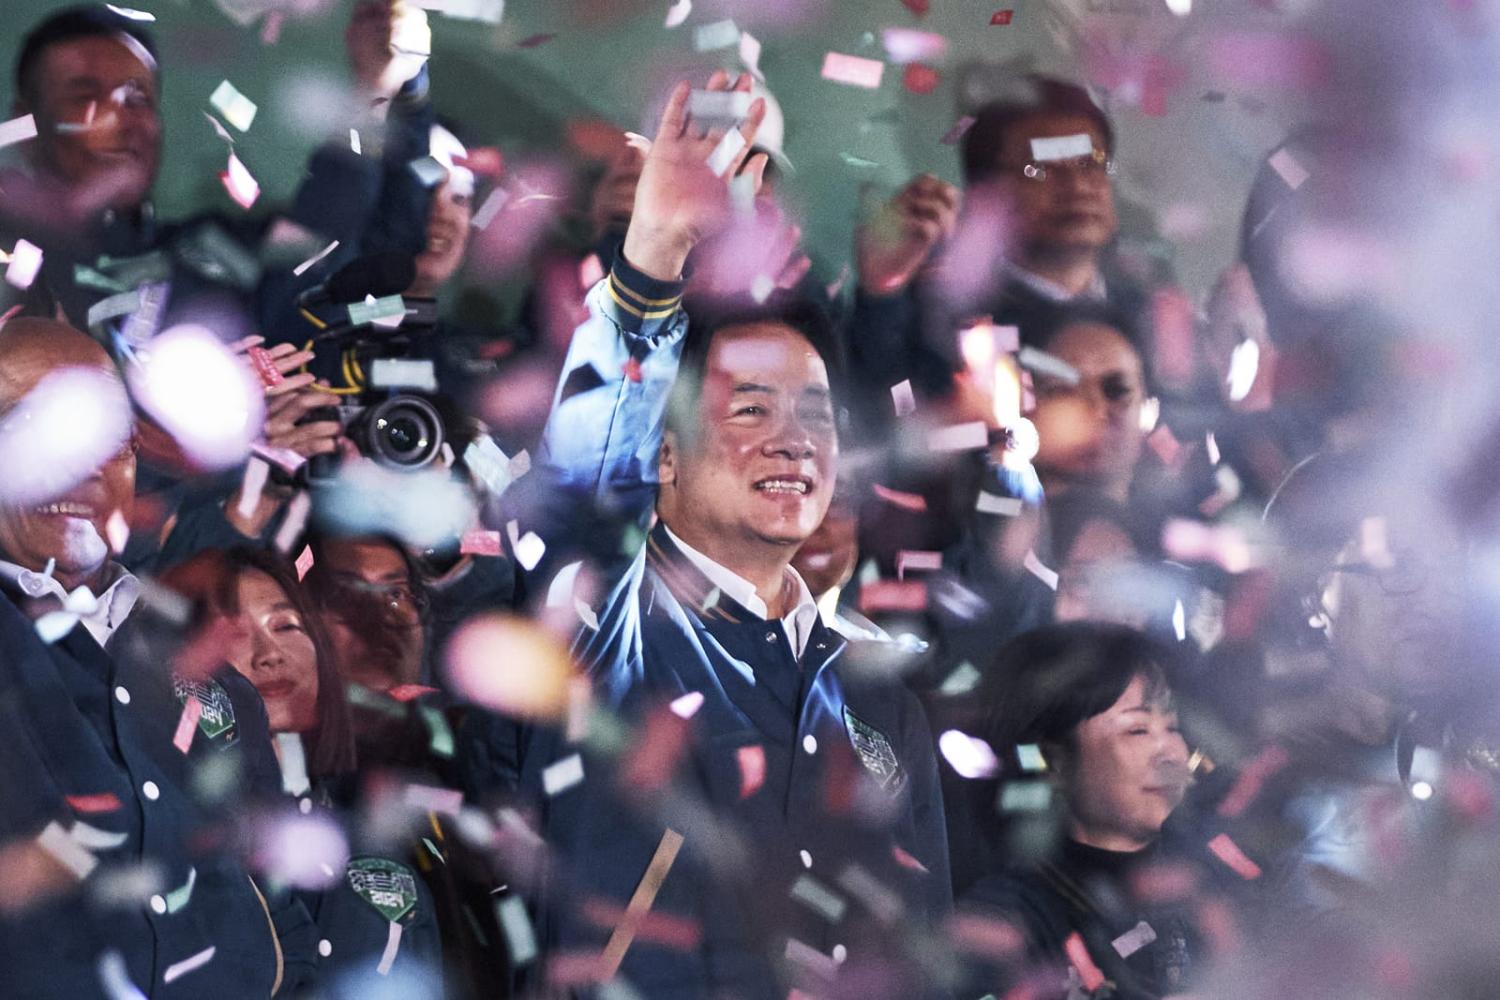 Lai Ching-te, Taiwan's president-elect, at an election night rally outside the Democratic Progressive Party headquarters in Taipei, Taiwan on 13 January (An Rong Xu/Bloomberg via Getty Images)